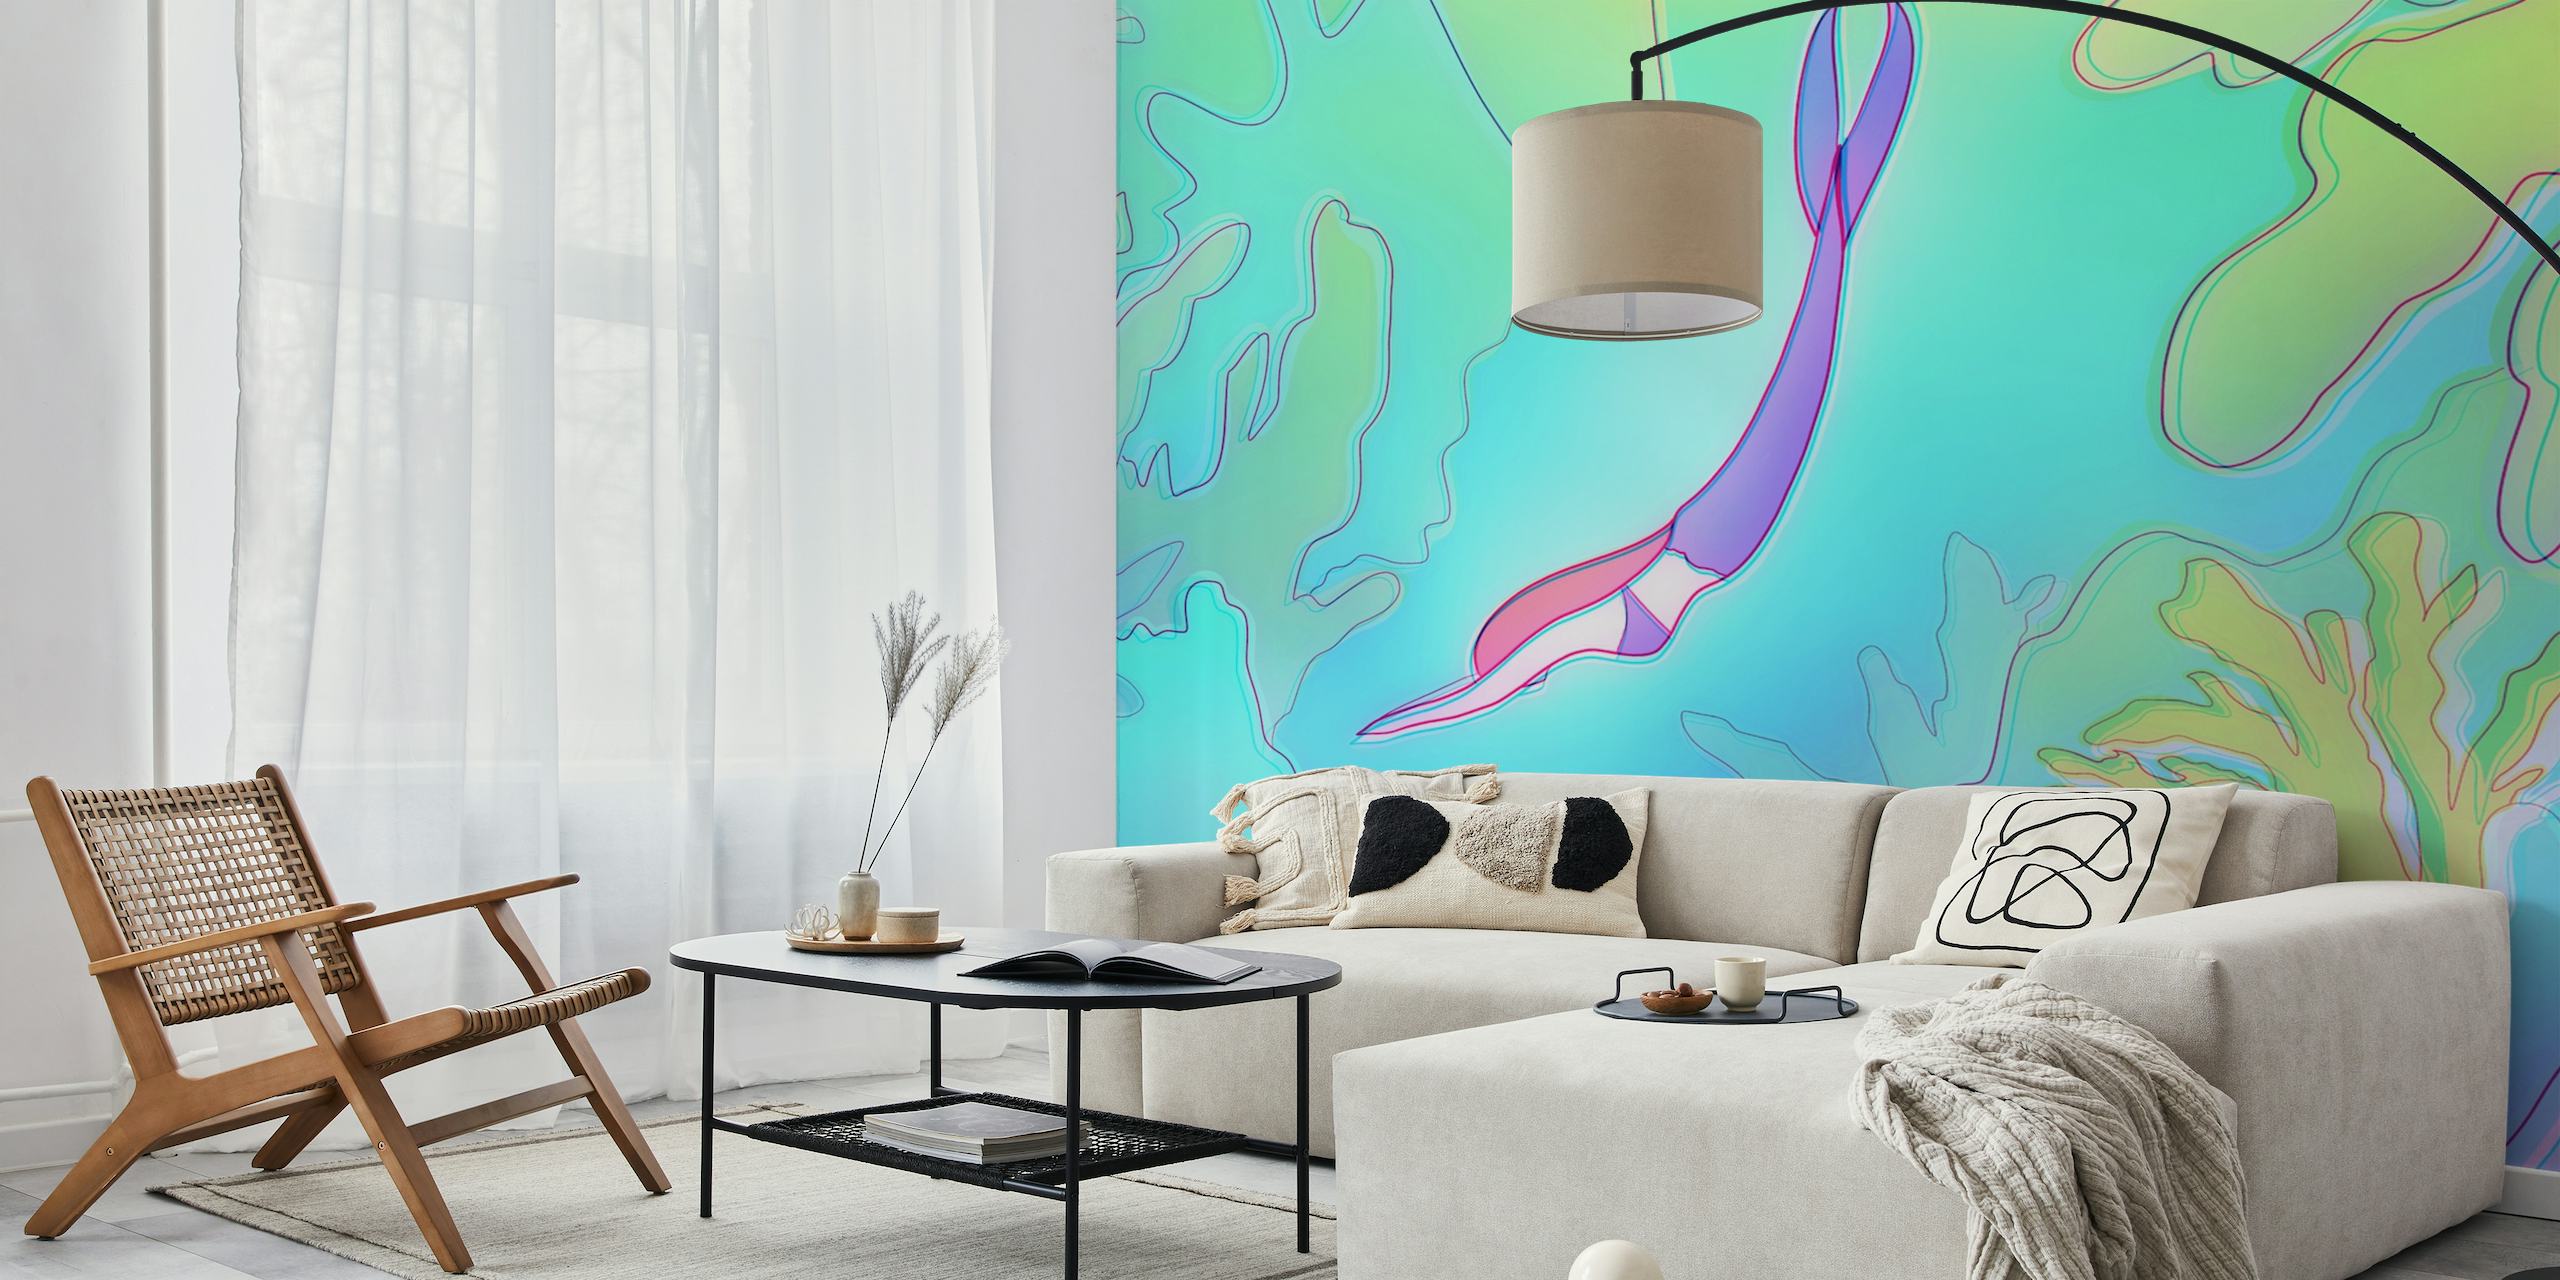 Illustrative wall mural of a diver in a colorful underwater setting